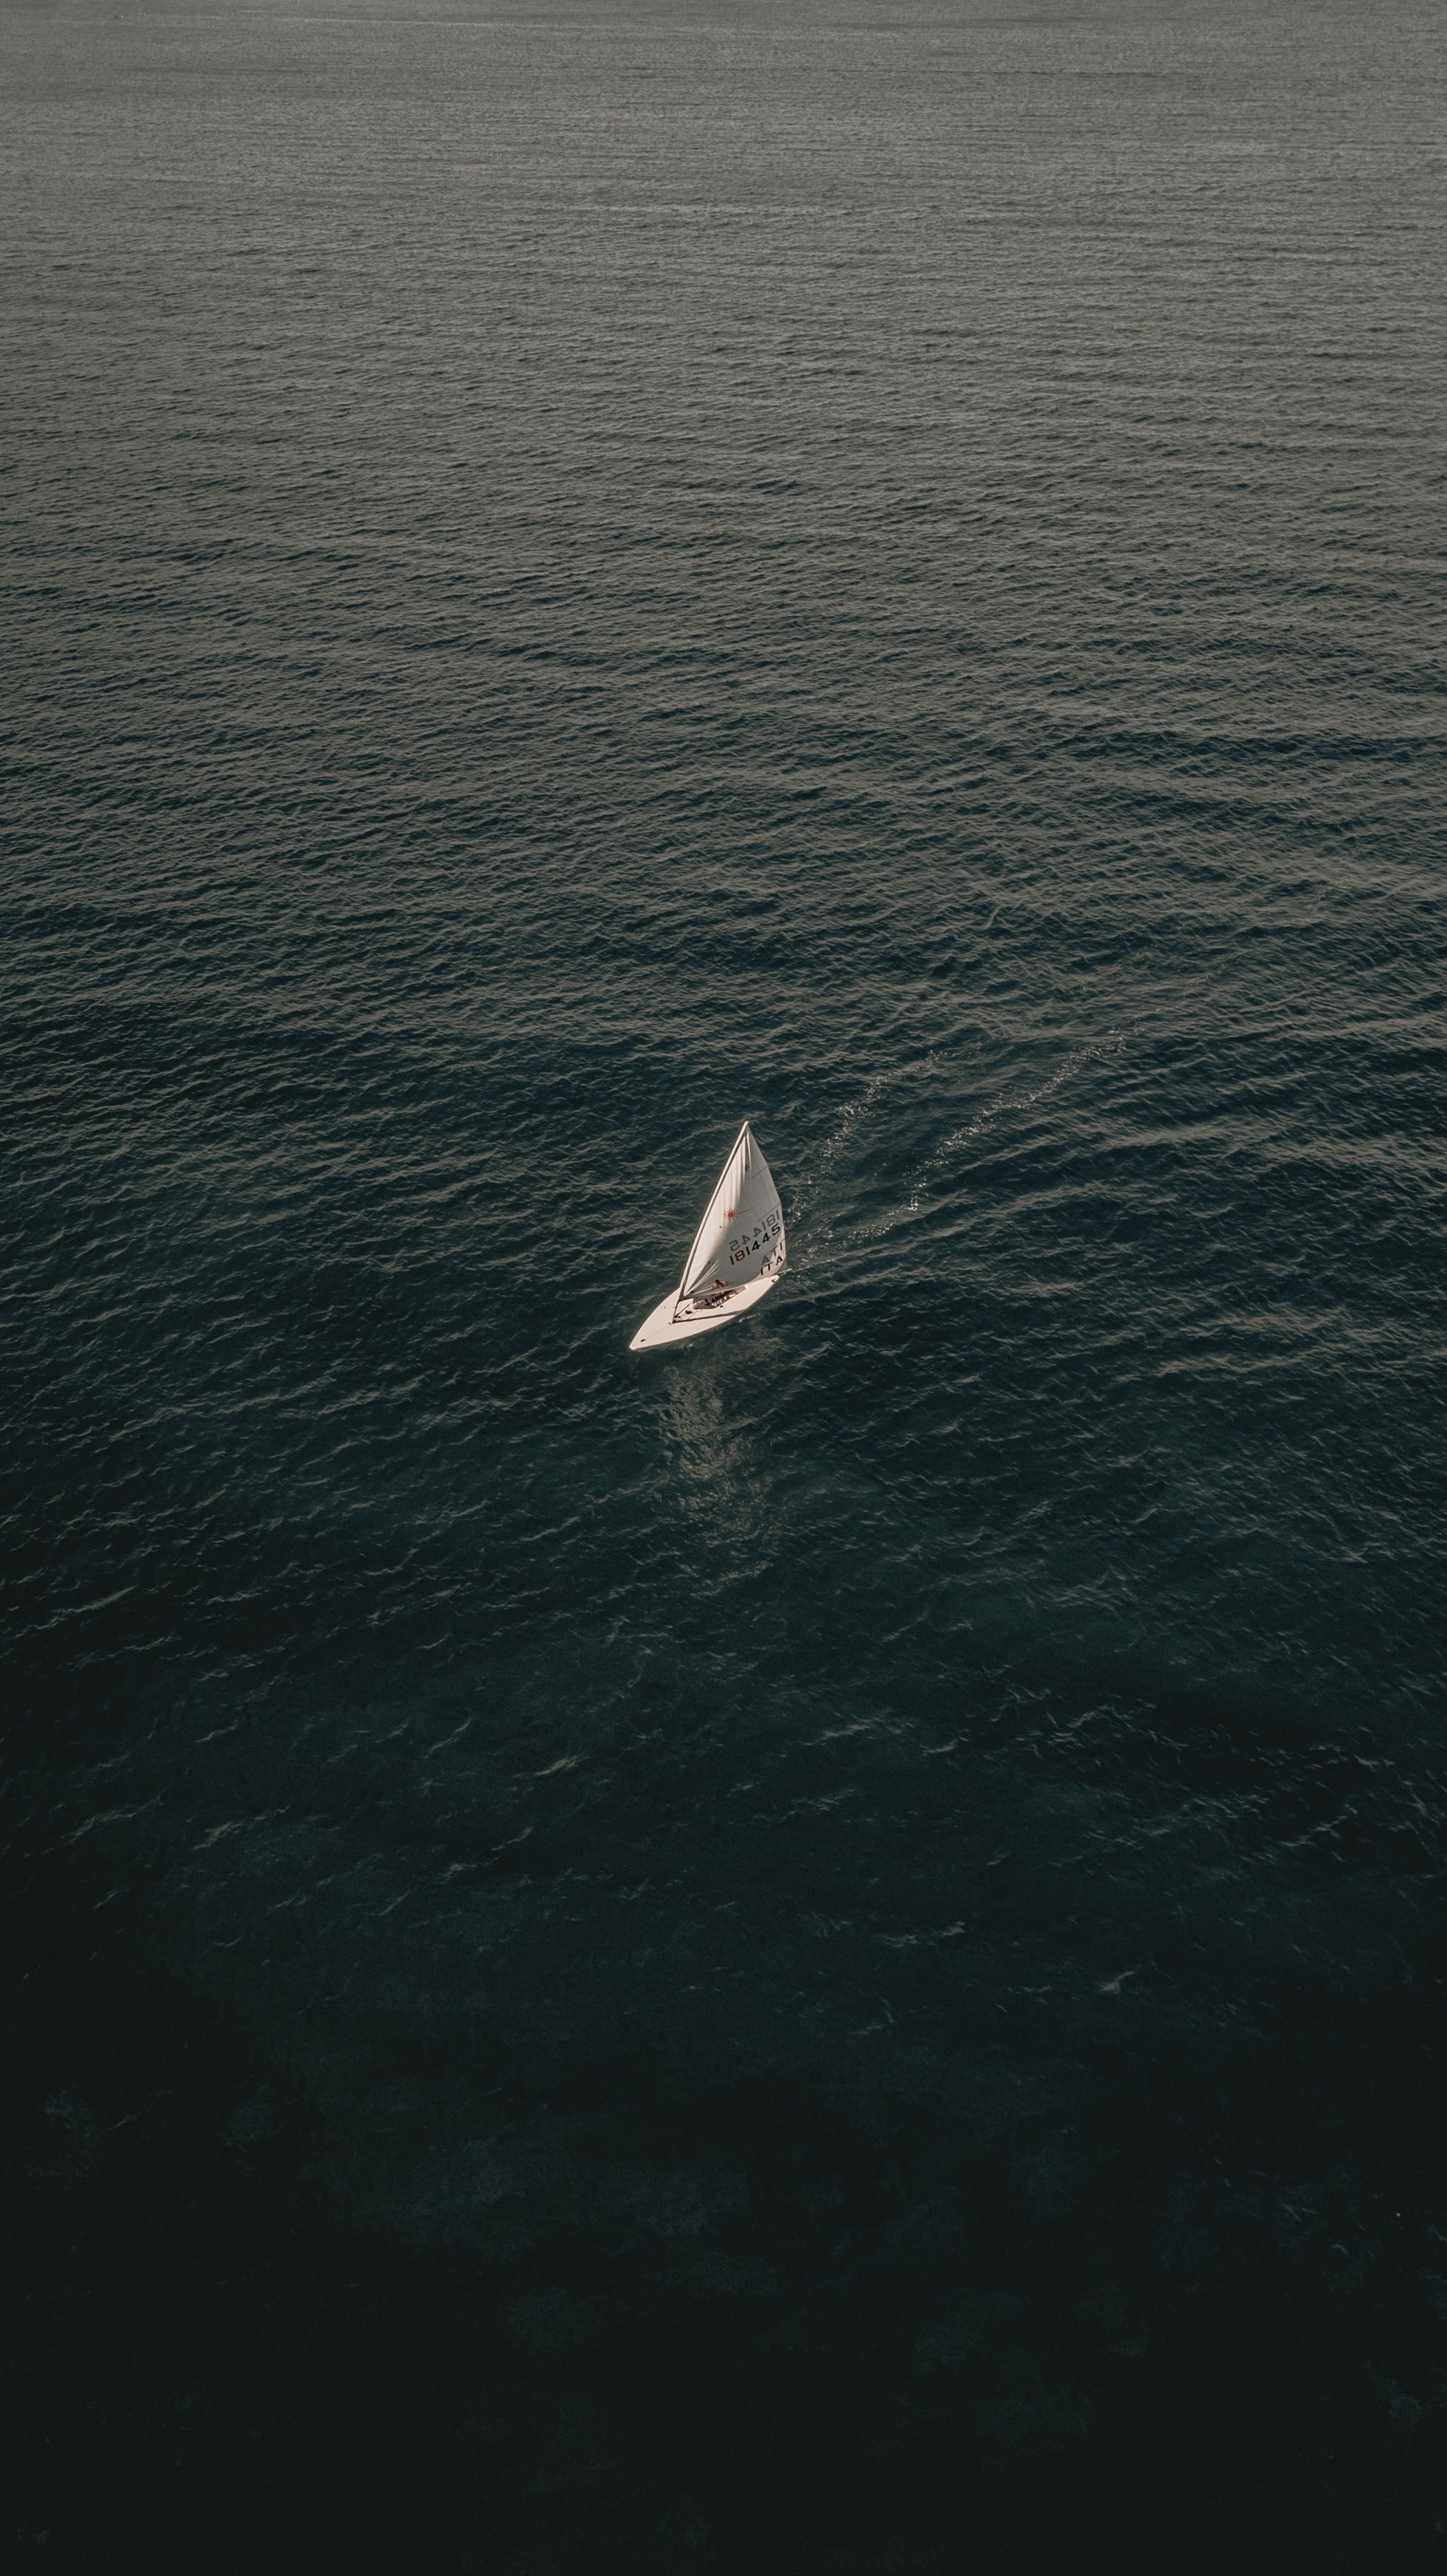 water, boat, view from above, sail, sea, nature